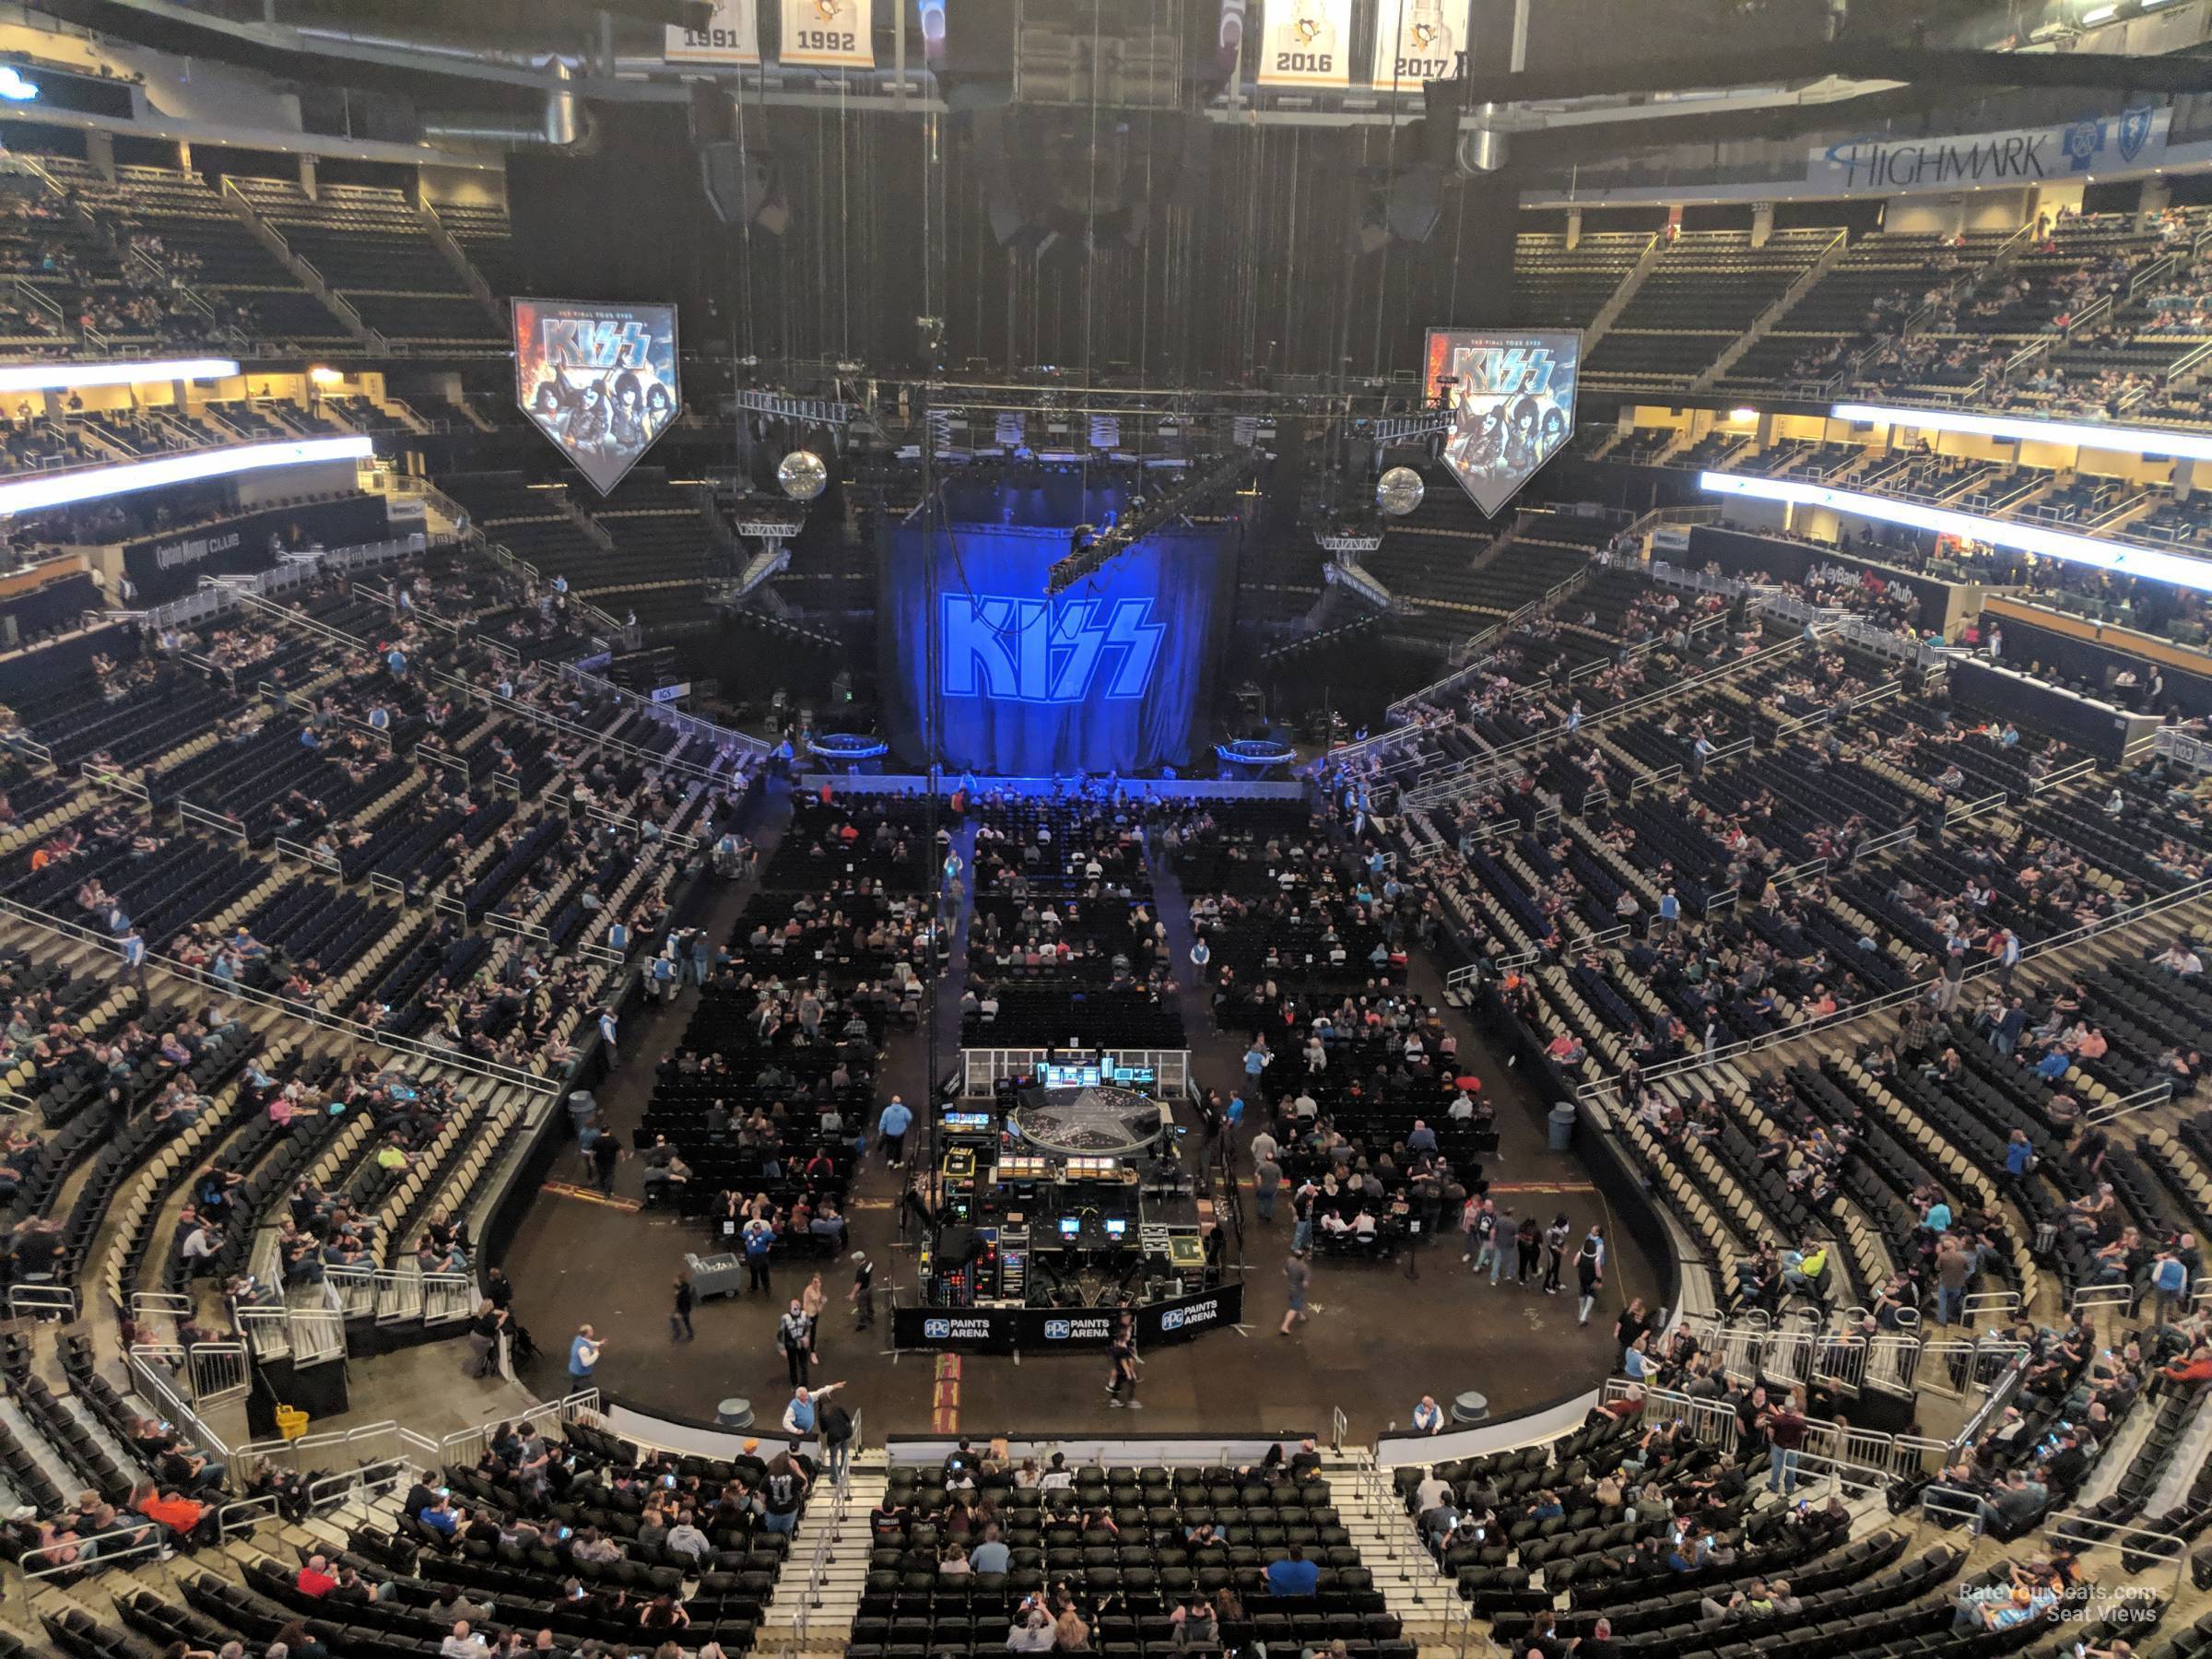 Section 211 at PPG Paints Arena for Concerts